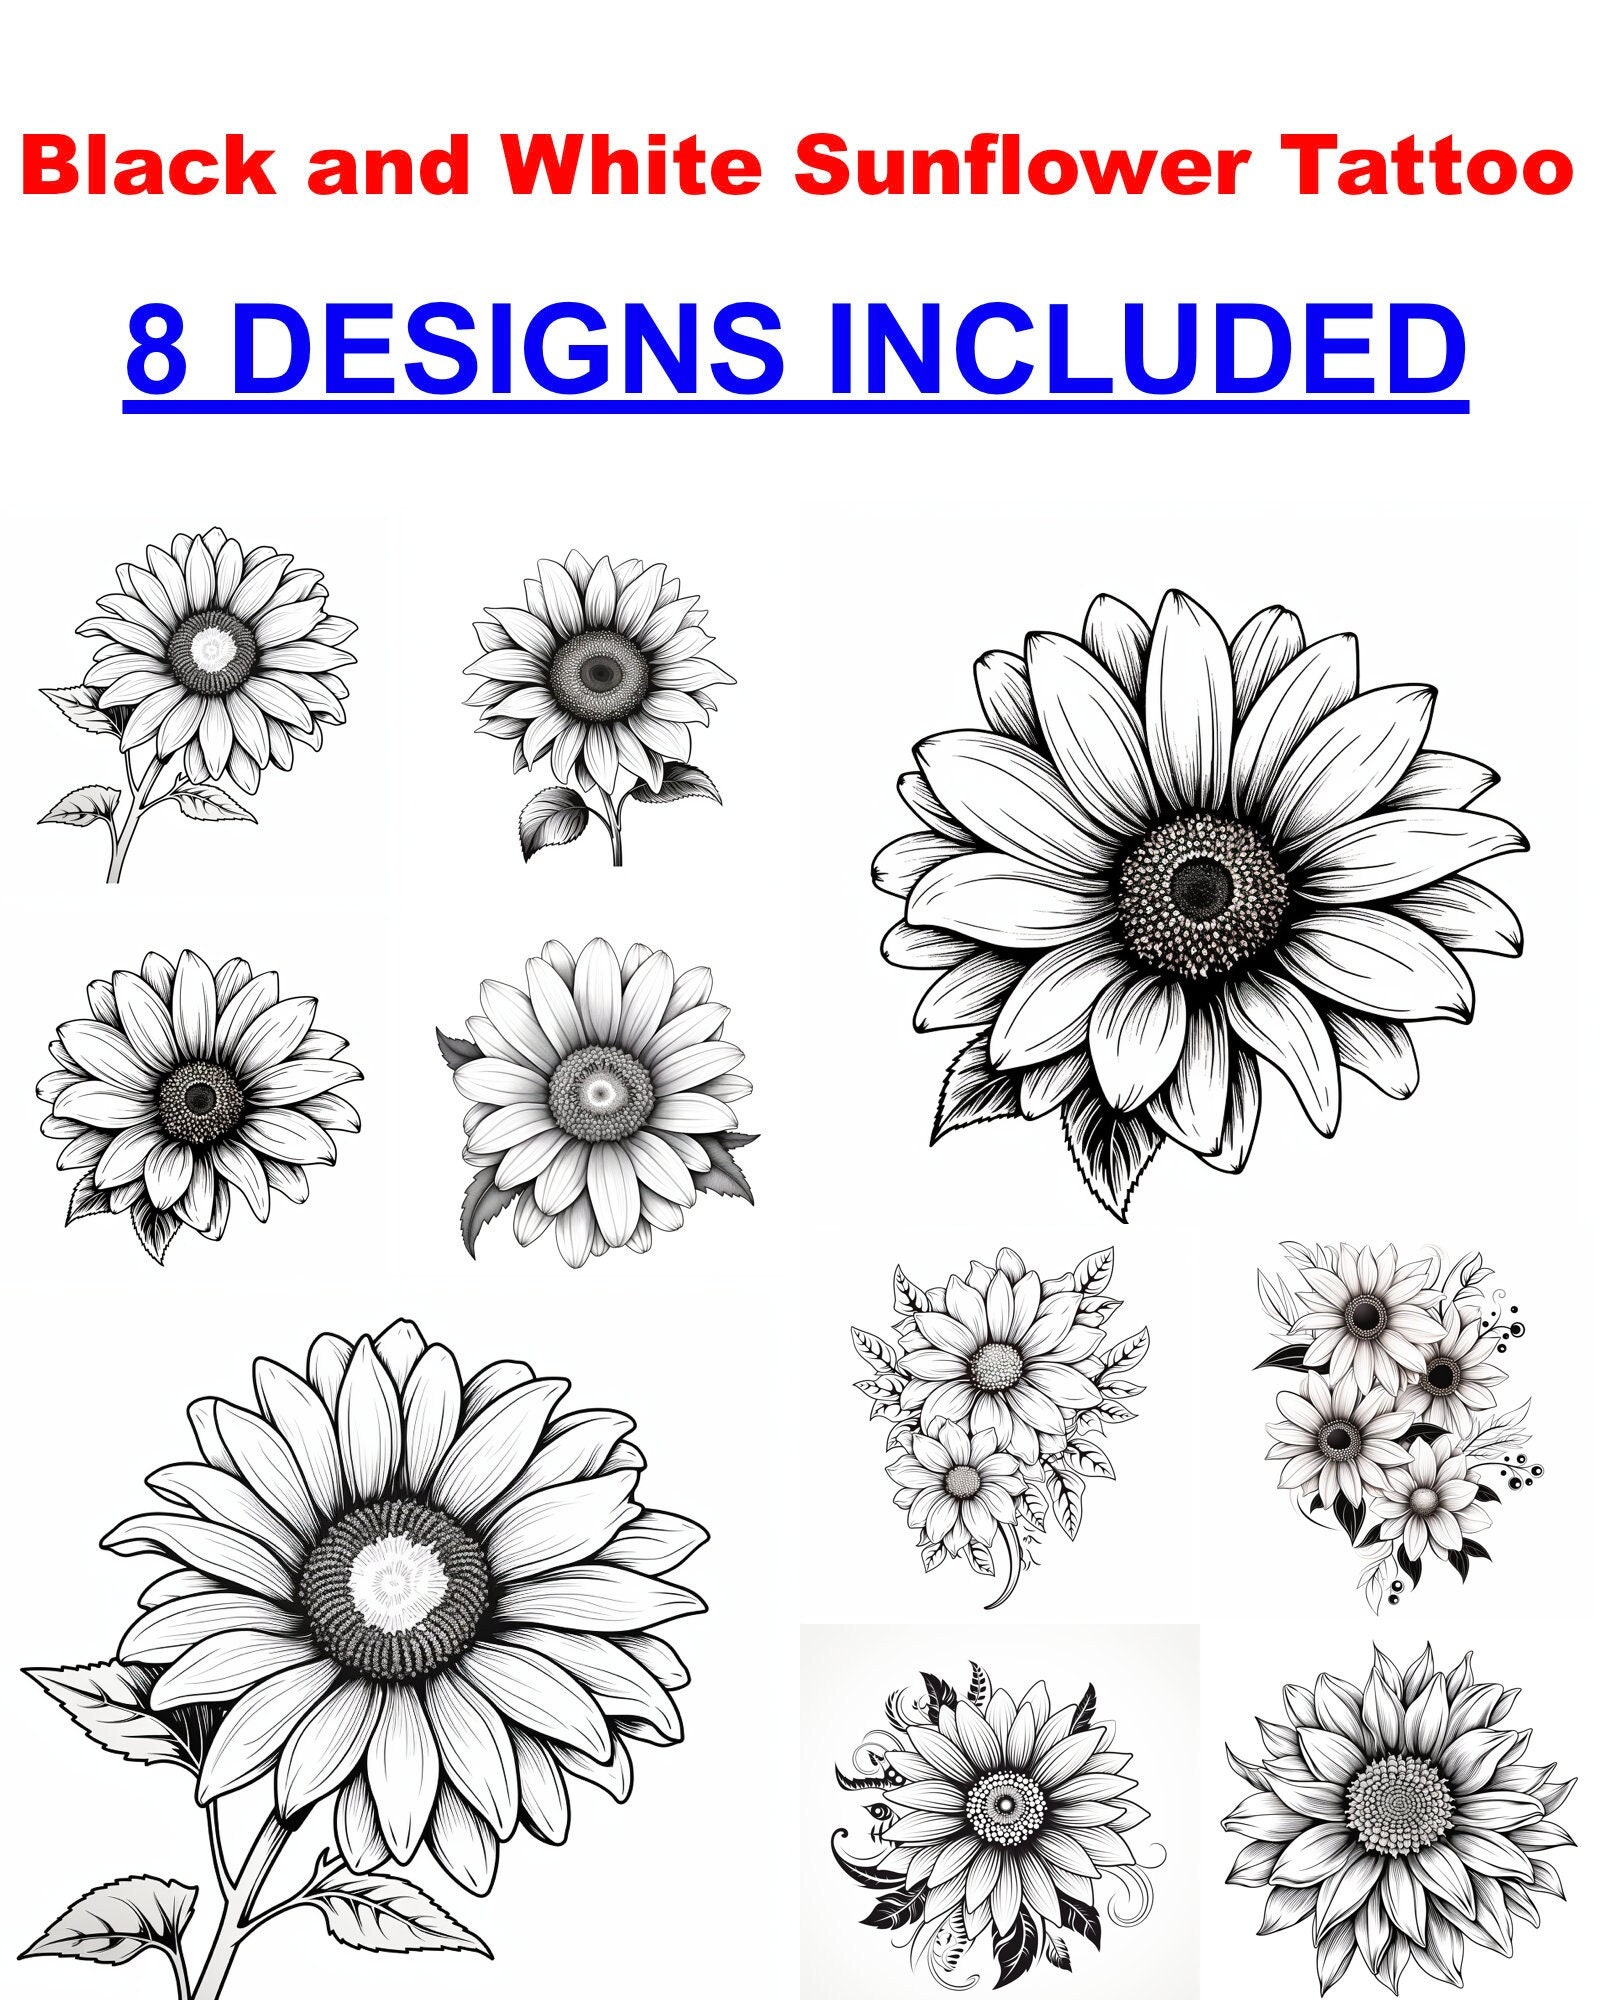 52 Small Sunflower Tattoo Ideas and Images | Sunflower drawing, Sunflower  tattoo small, Sunflower black and white